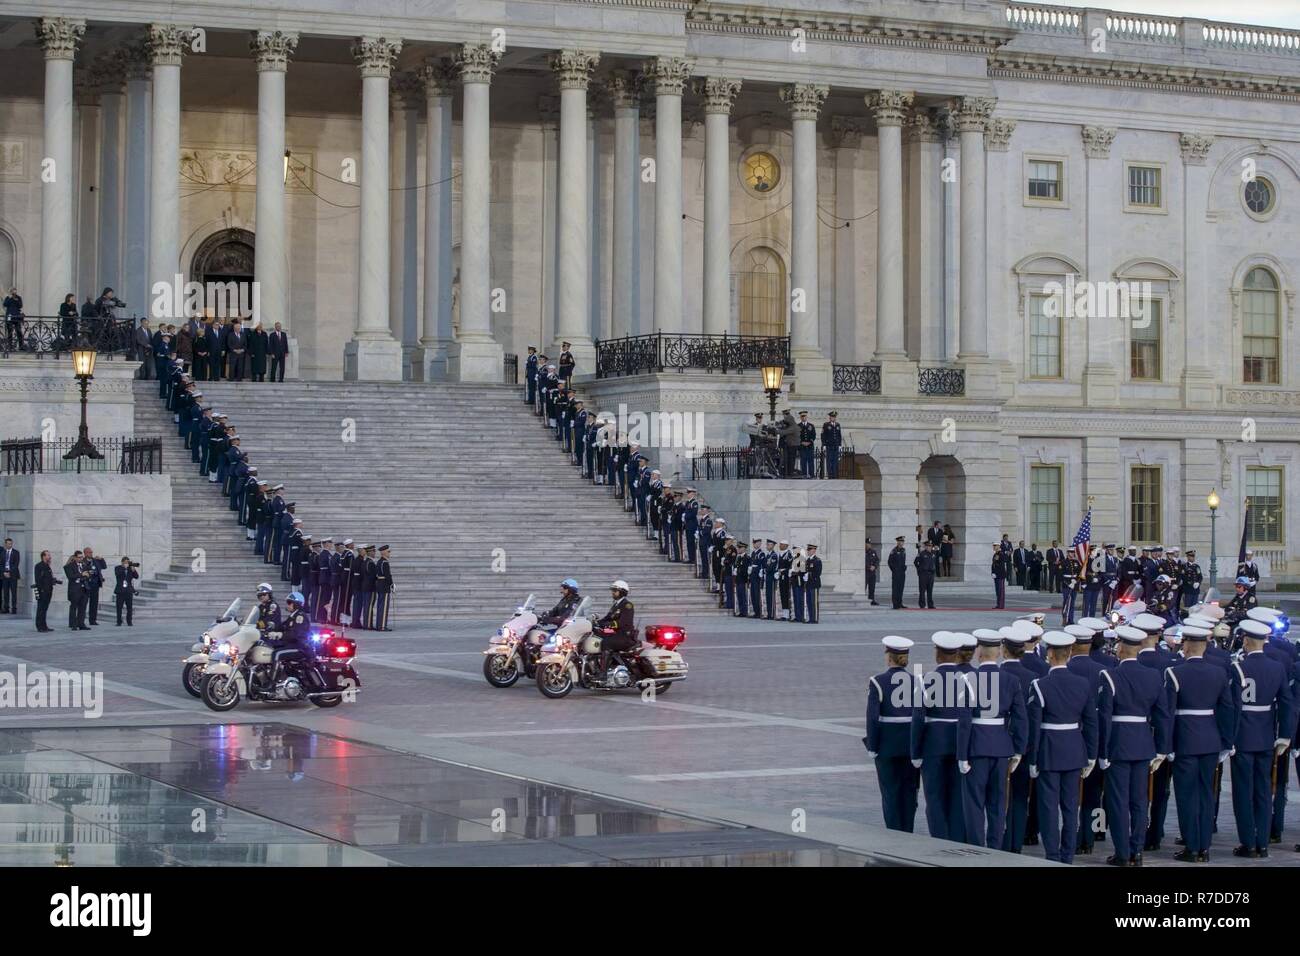 U.S. Capitol Police escort the hearse carrying the casket of George H.W. Bush, 41st President of the United States, to the United States Capitol, Washington, D.C., Dec. 3, 2018. Nearly 4,000 military and civilian personnel from across all branches of the U.S. armed forces, including Reserve and National Guard Components, provided ceremonial support during George H.W. Bush’s, the 41st President of the United States state funeral. (DoD Stock Photo